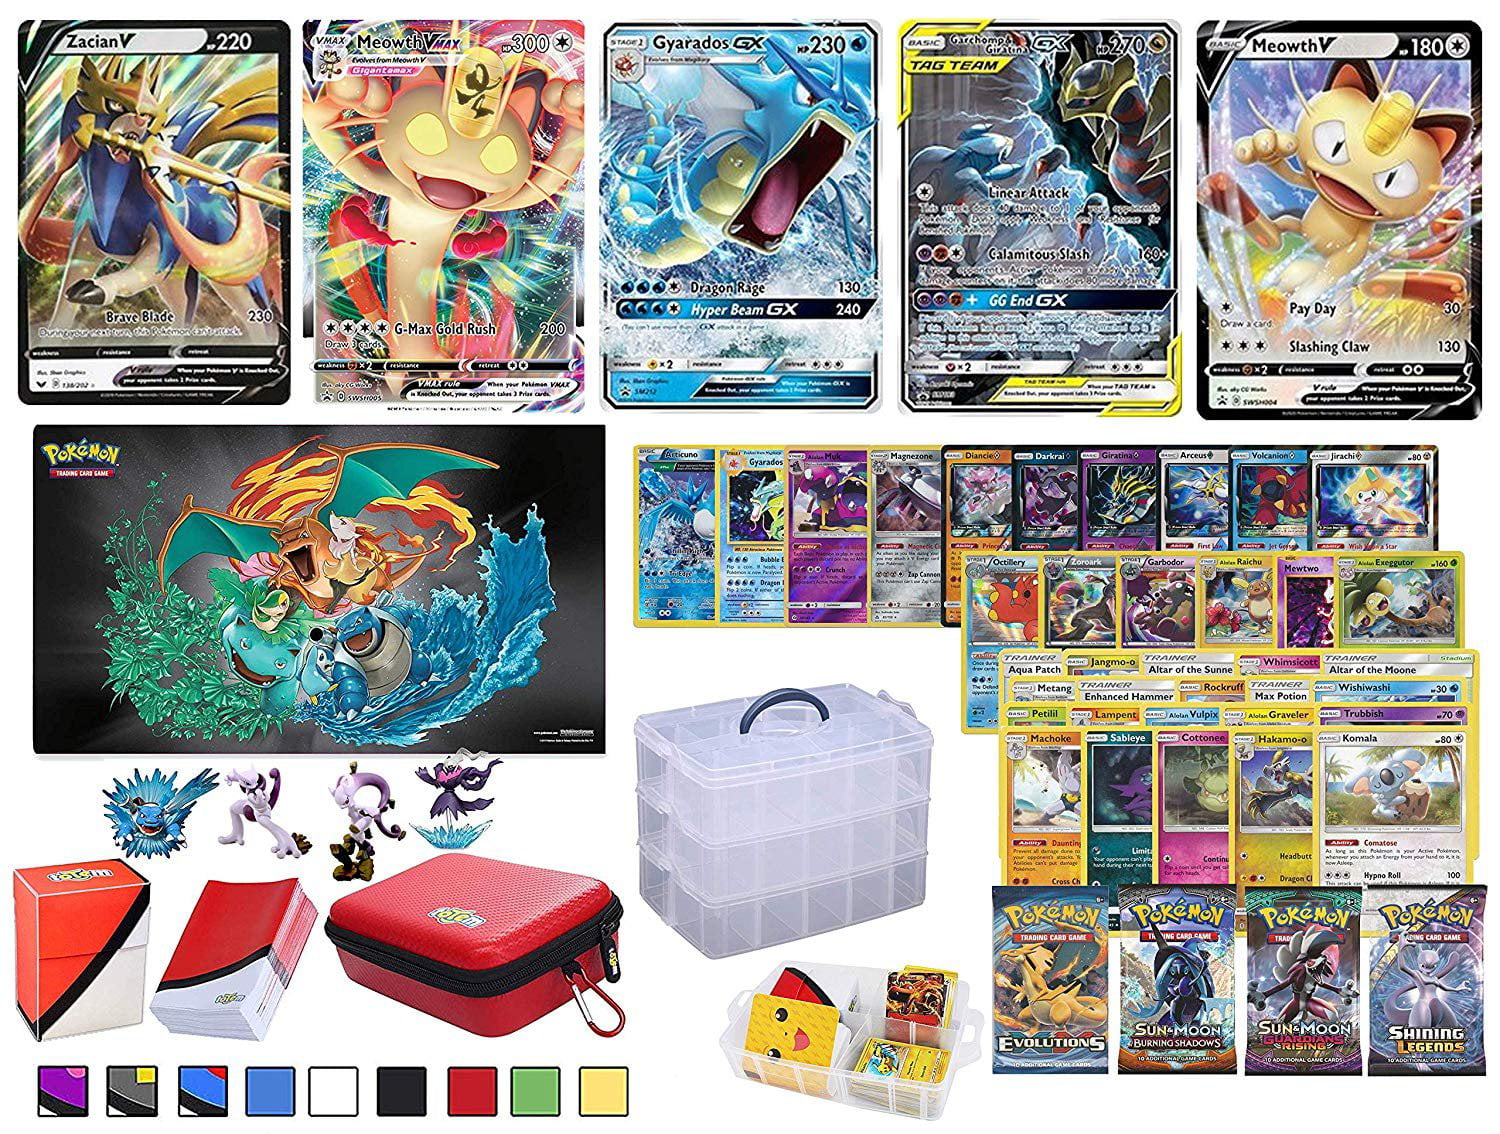 Totem World Tag Team Generations Premium Collection Playmat with a Totem Mini Binder Collectors Album 